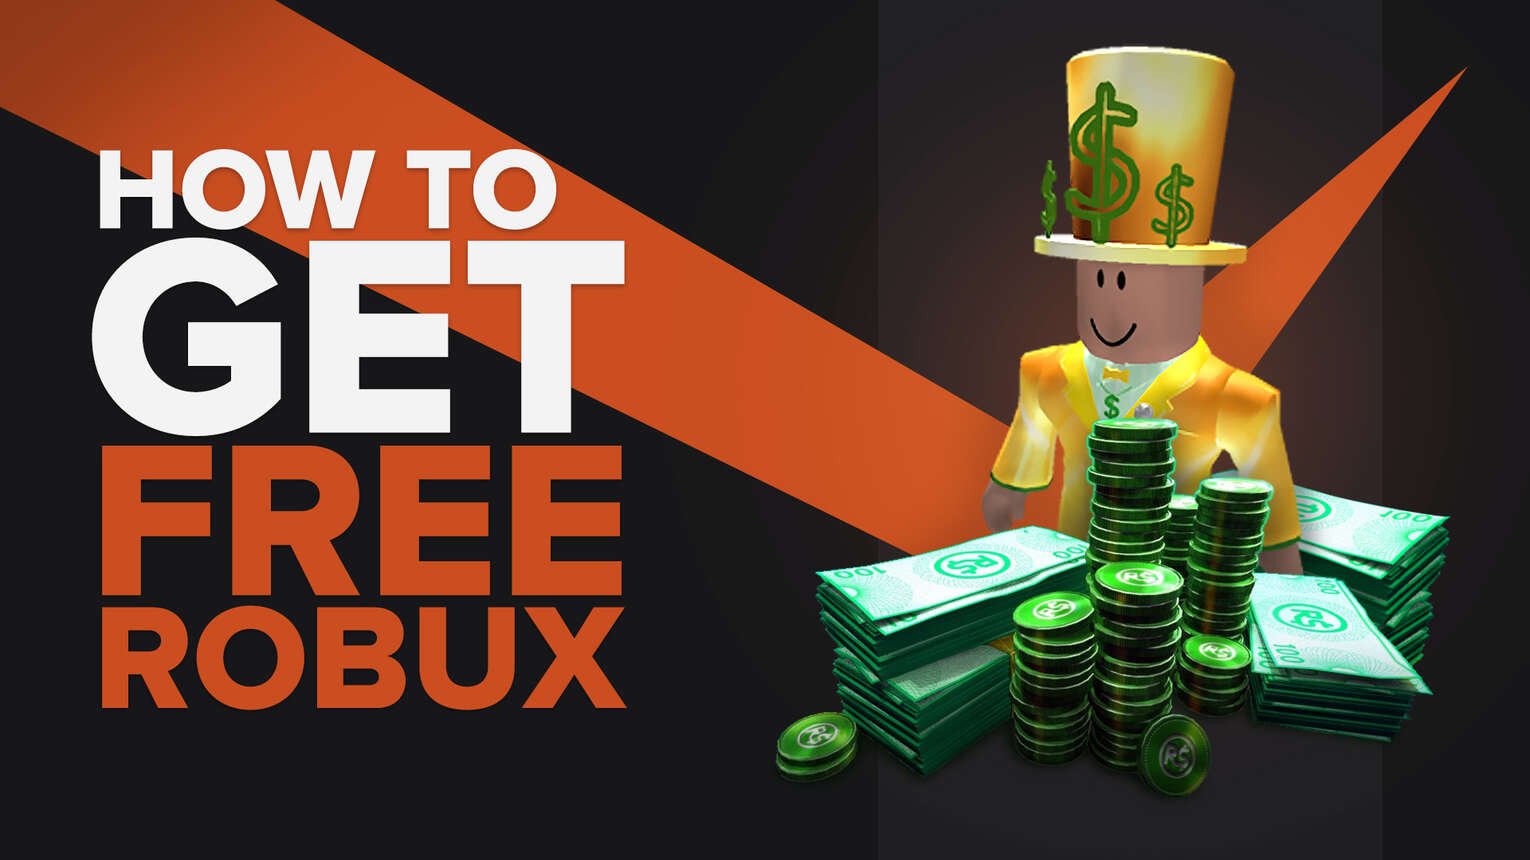 How To Get Free Robux In Roblox (4 Legit Ways Without Human Verification)